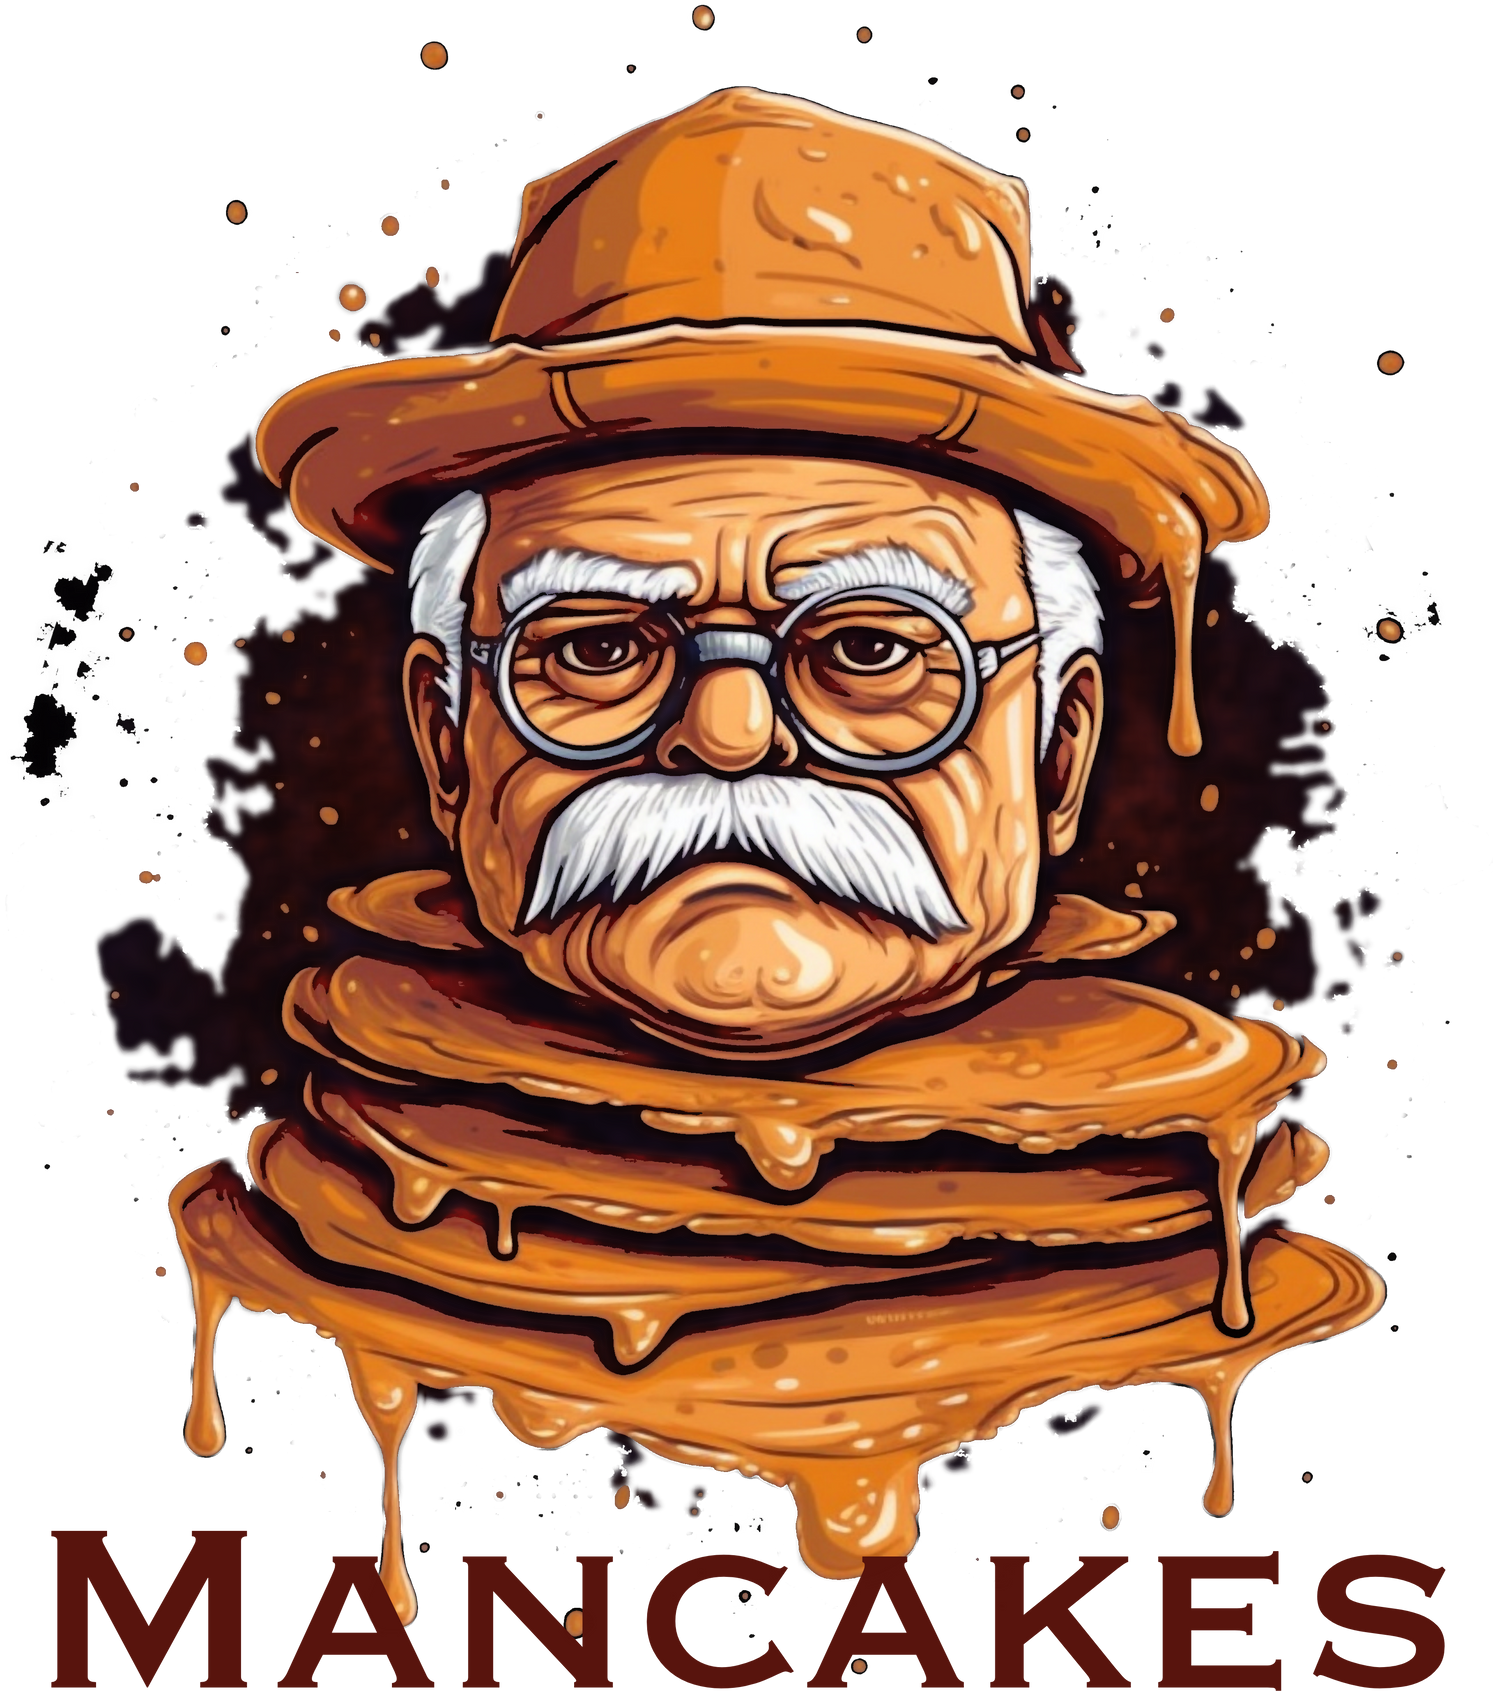 Mancakes: A short stack with the head of Wilfred Brimley